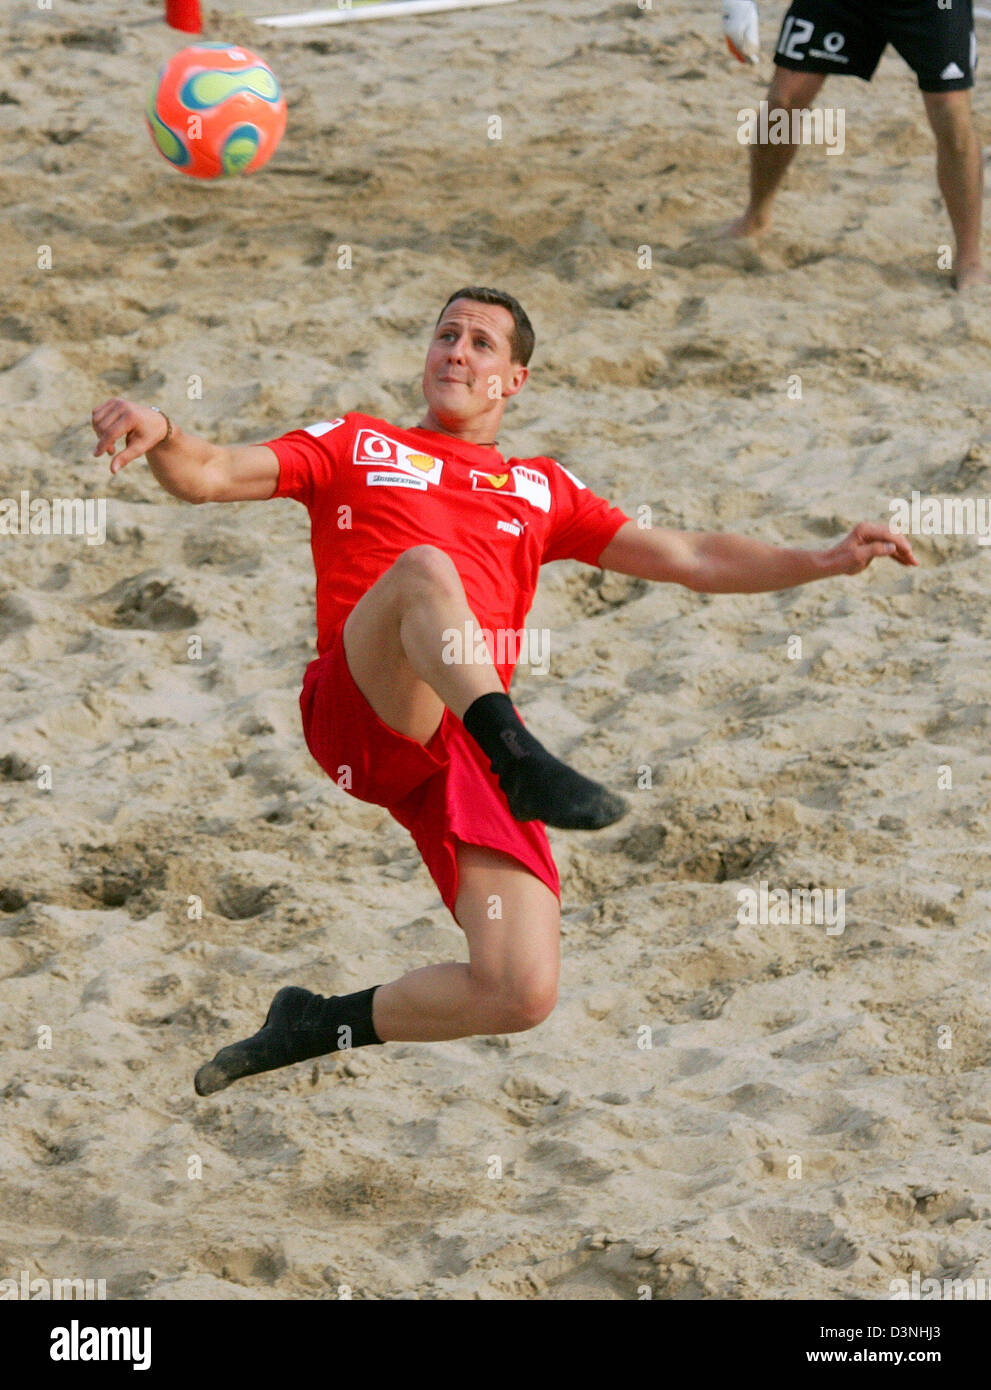 German Formula One driver Michael Schumacher of Scuderia Ferrari F1 team performs a overhead kick during a beach soccer match at the F1 race track Circuit de Catalunya in Montmelo near Barcelona, Spain, Thursday 11 May 2006. The Grand Prix of Spain takes place on Sunday. Photo: Gero Breloer Stock Photo